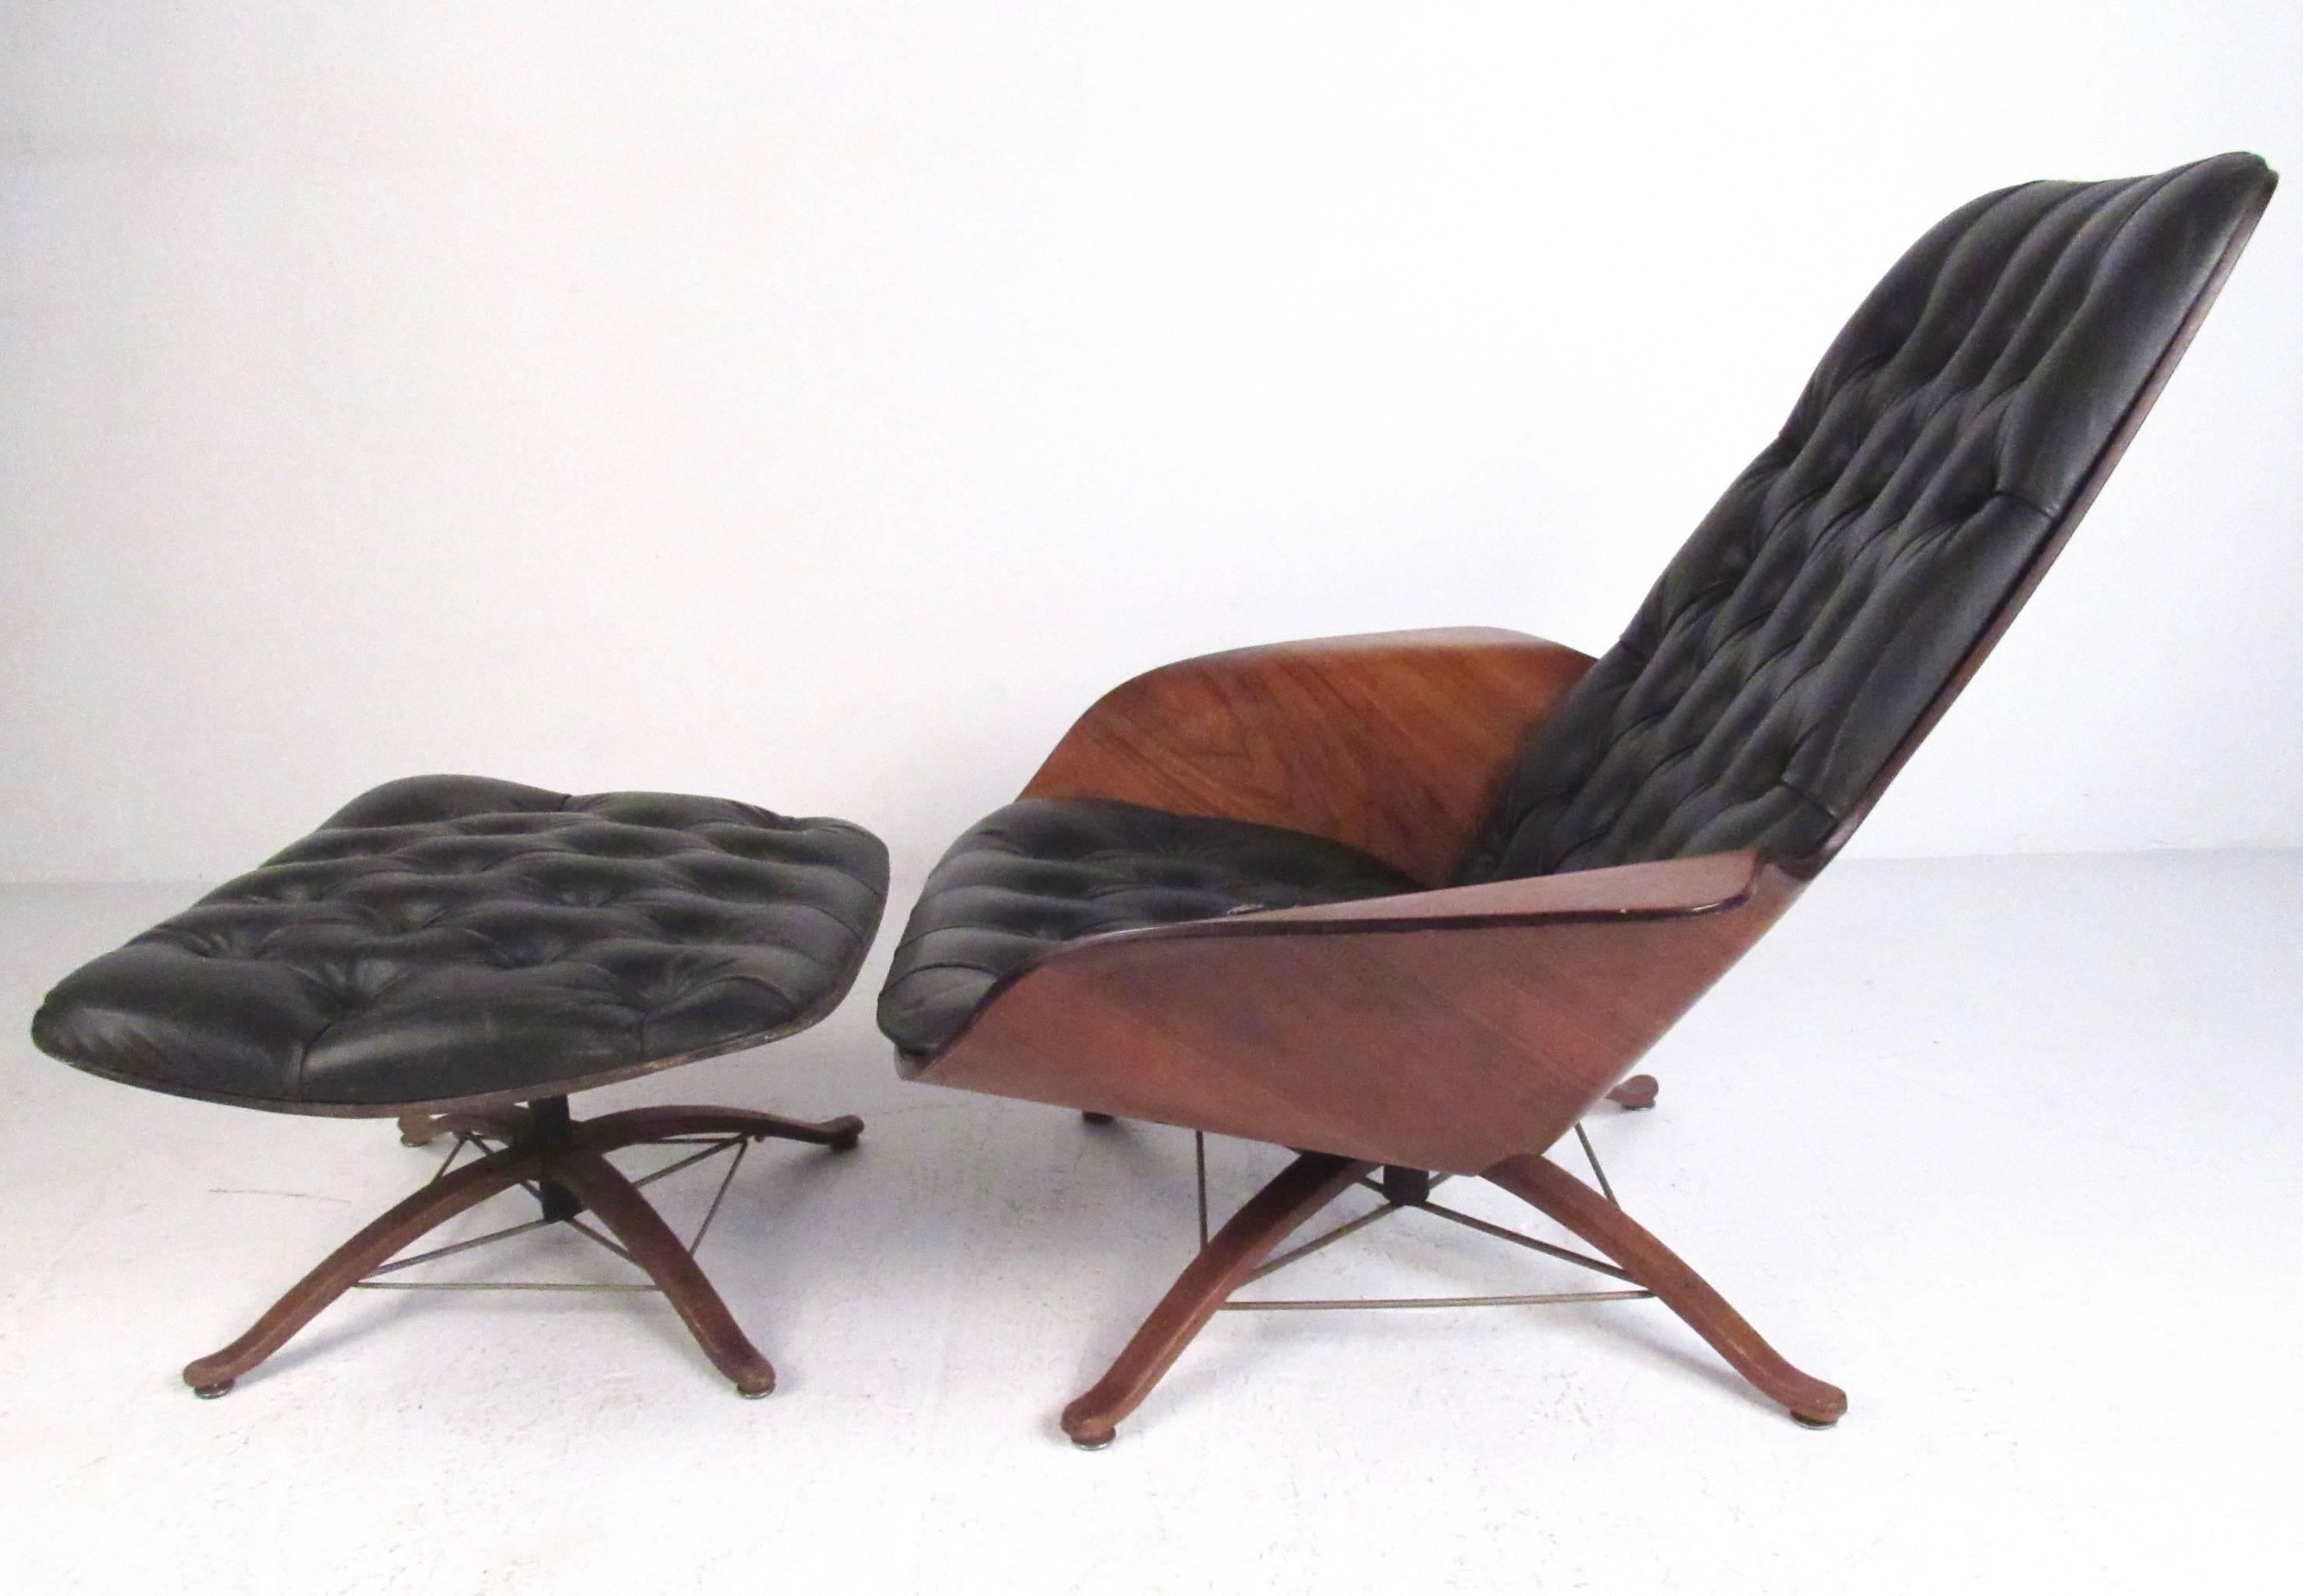 This molded ply lounge chair by George Mulhauser features stylish wing-like arms, tufted vinyl, and a unique hardwood base with brass eiffel stretchers. The combination of mid-century design and timeless comfort make this swivel chair the perfect